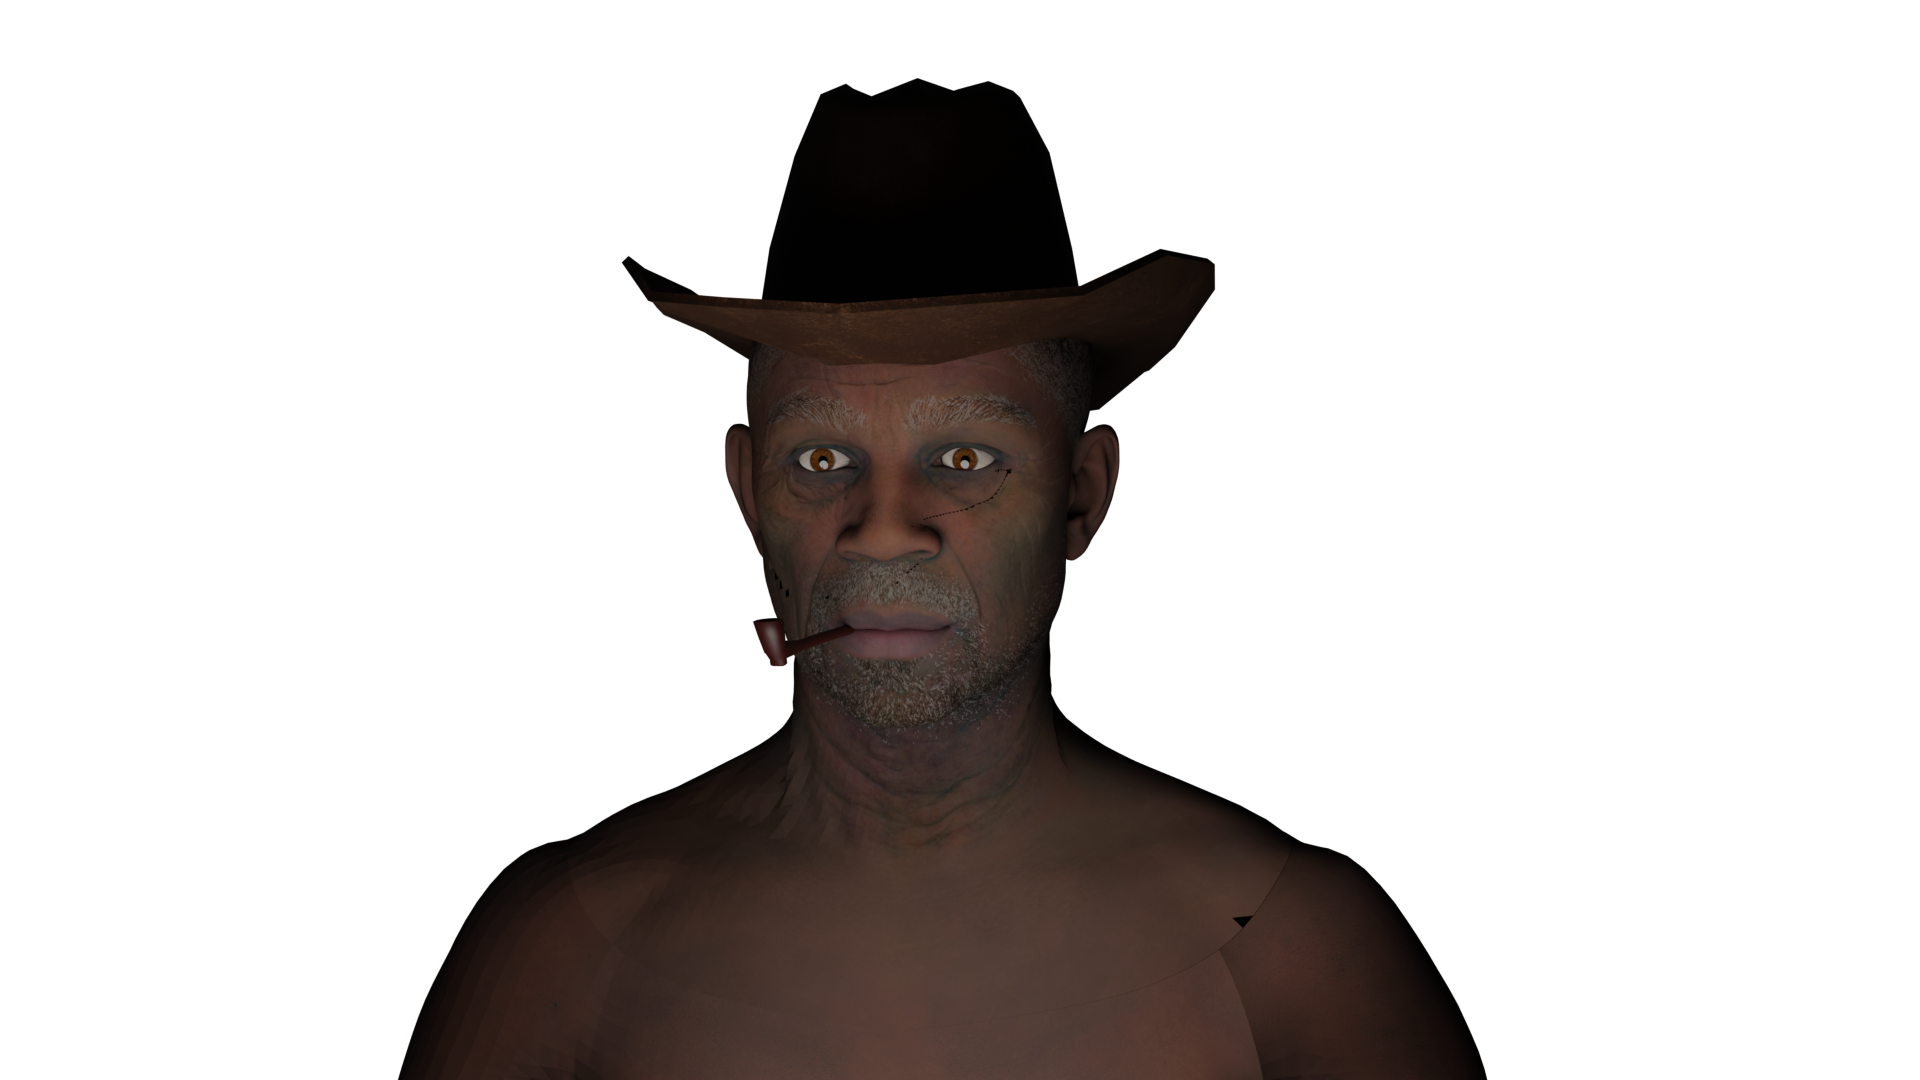 A 3D sculpted man stares beyond the camera with a hat on his head and a pipe in his mouth.